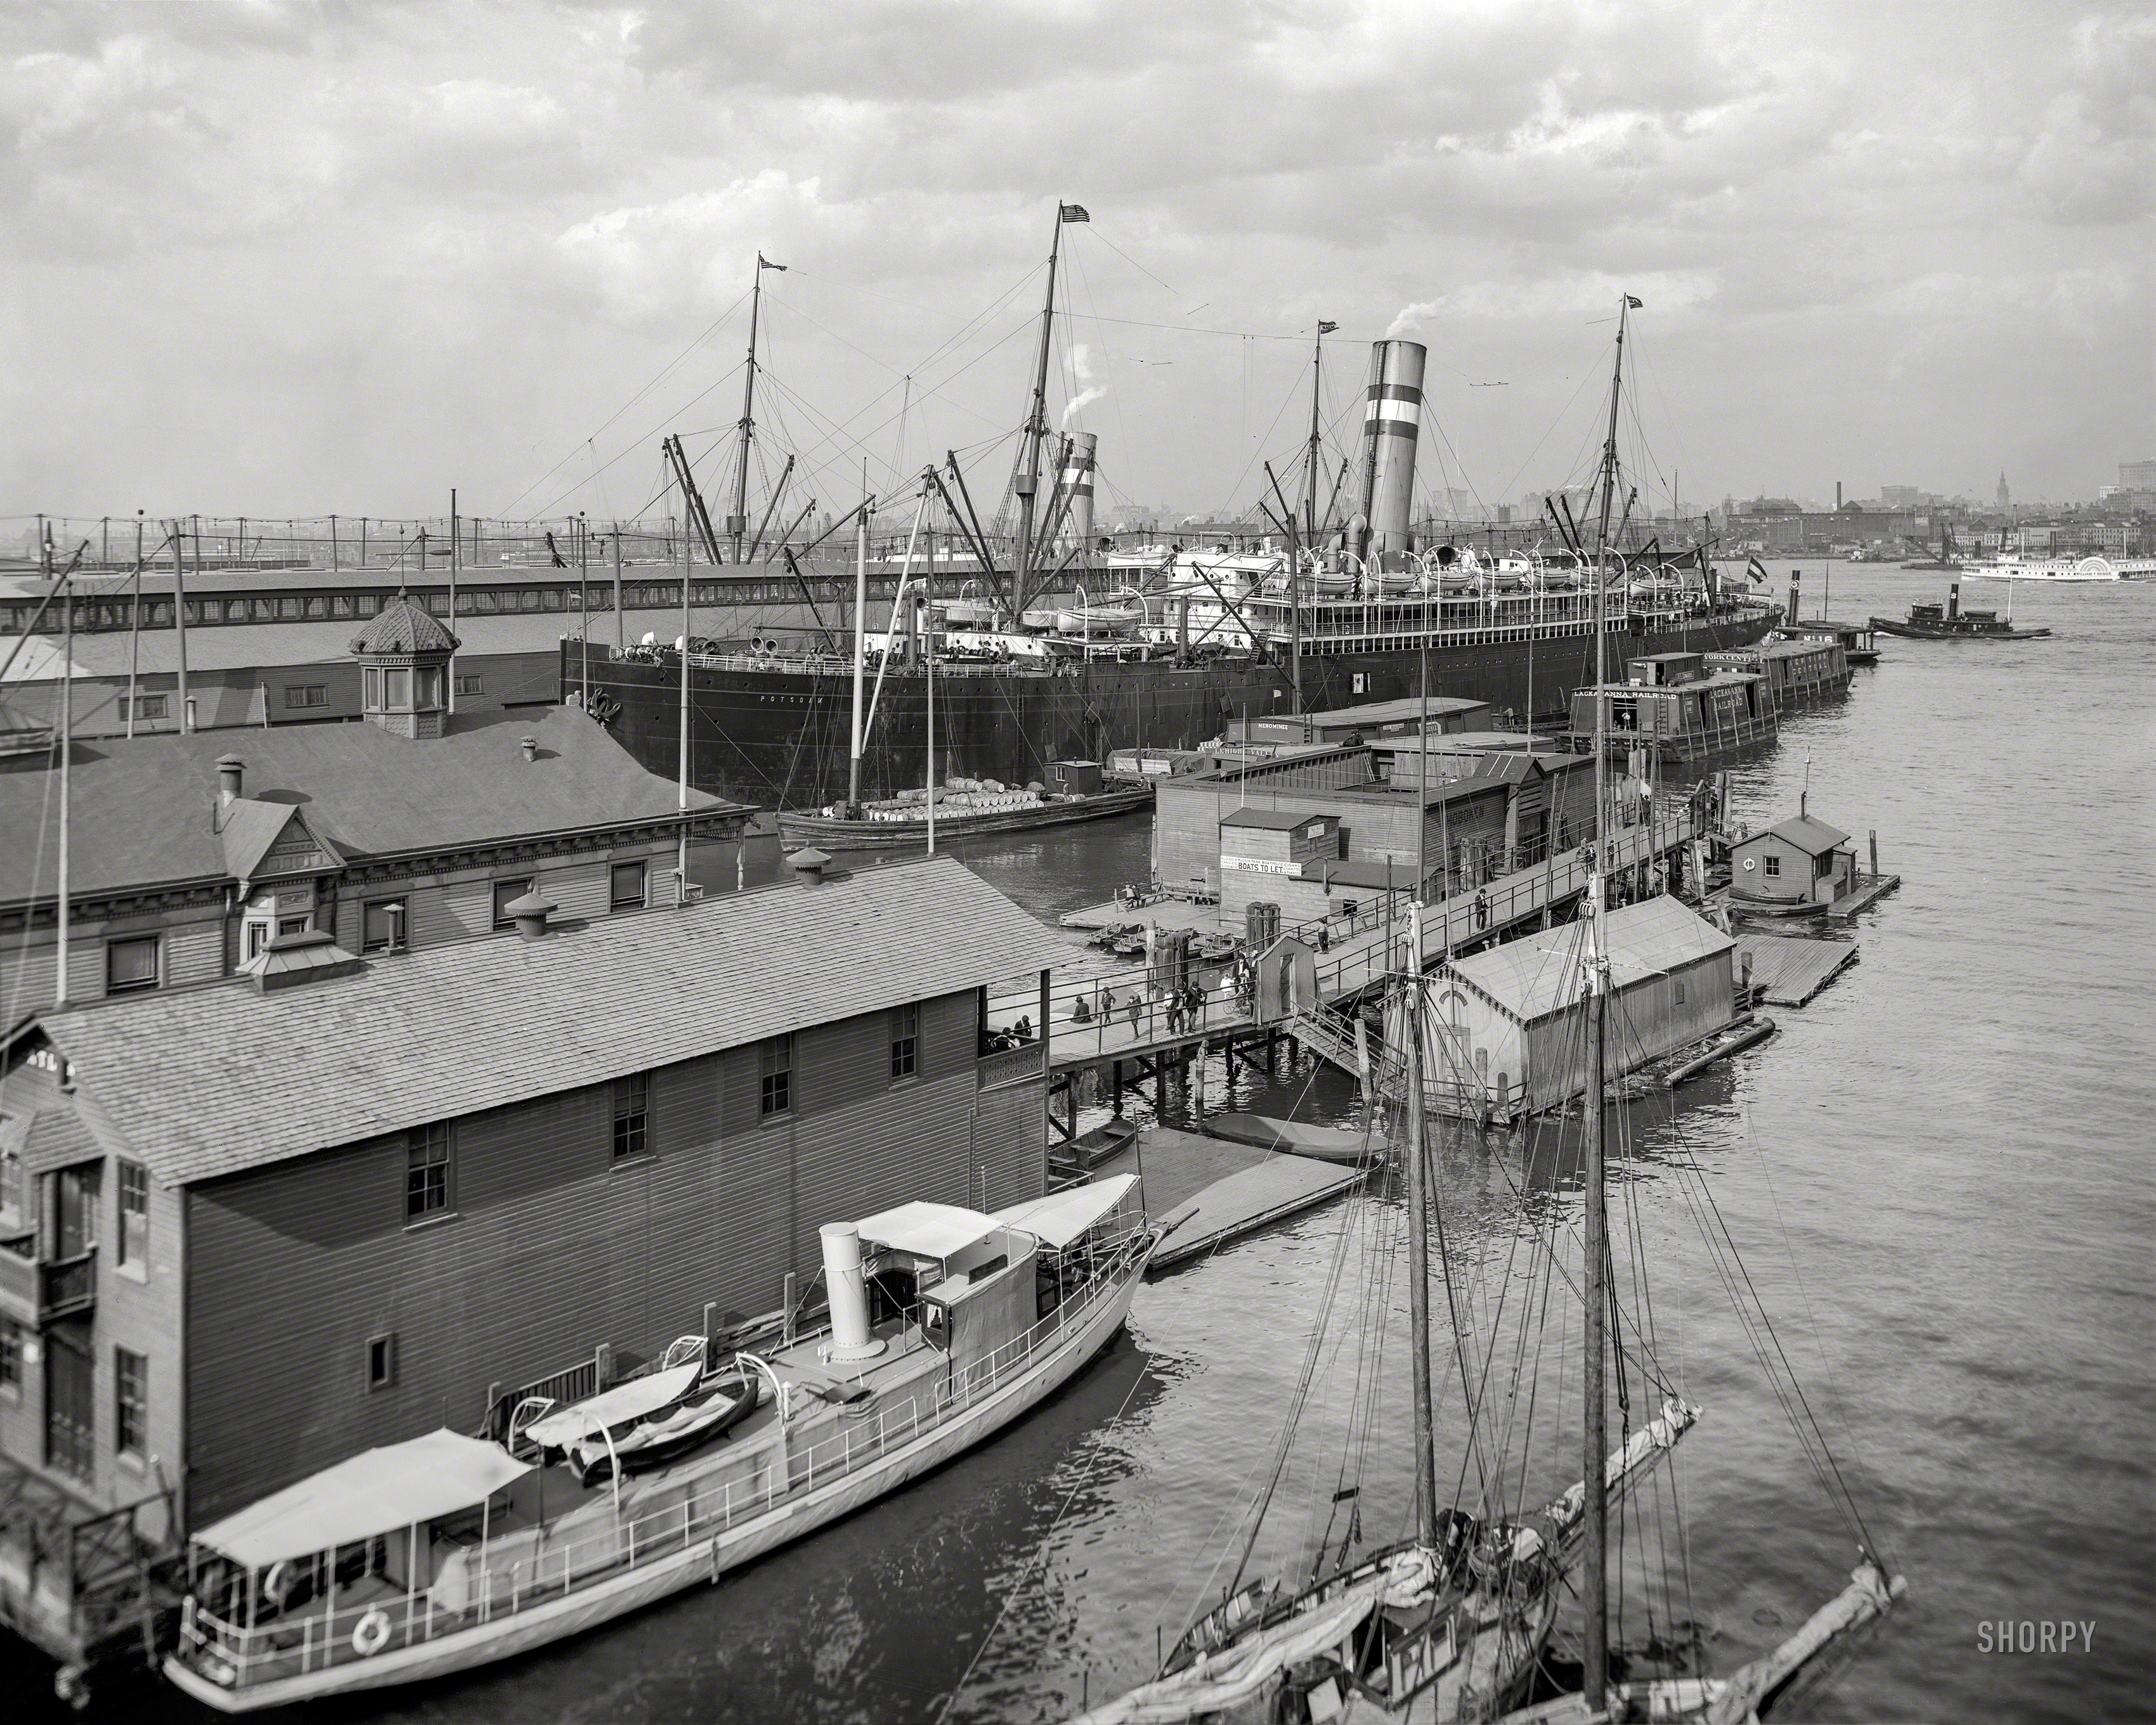 1905. "Holland America line piers, Hoboken, N.J." Points of interest include the Hoboken Public Bath at center and S.S. Potsdam. 8x10 inch dry plate glass negative, Detroit Publishing Company. View full size.